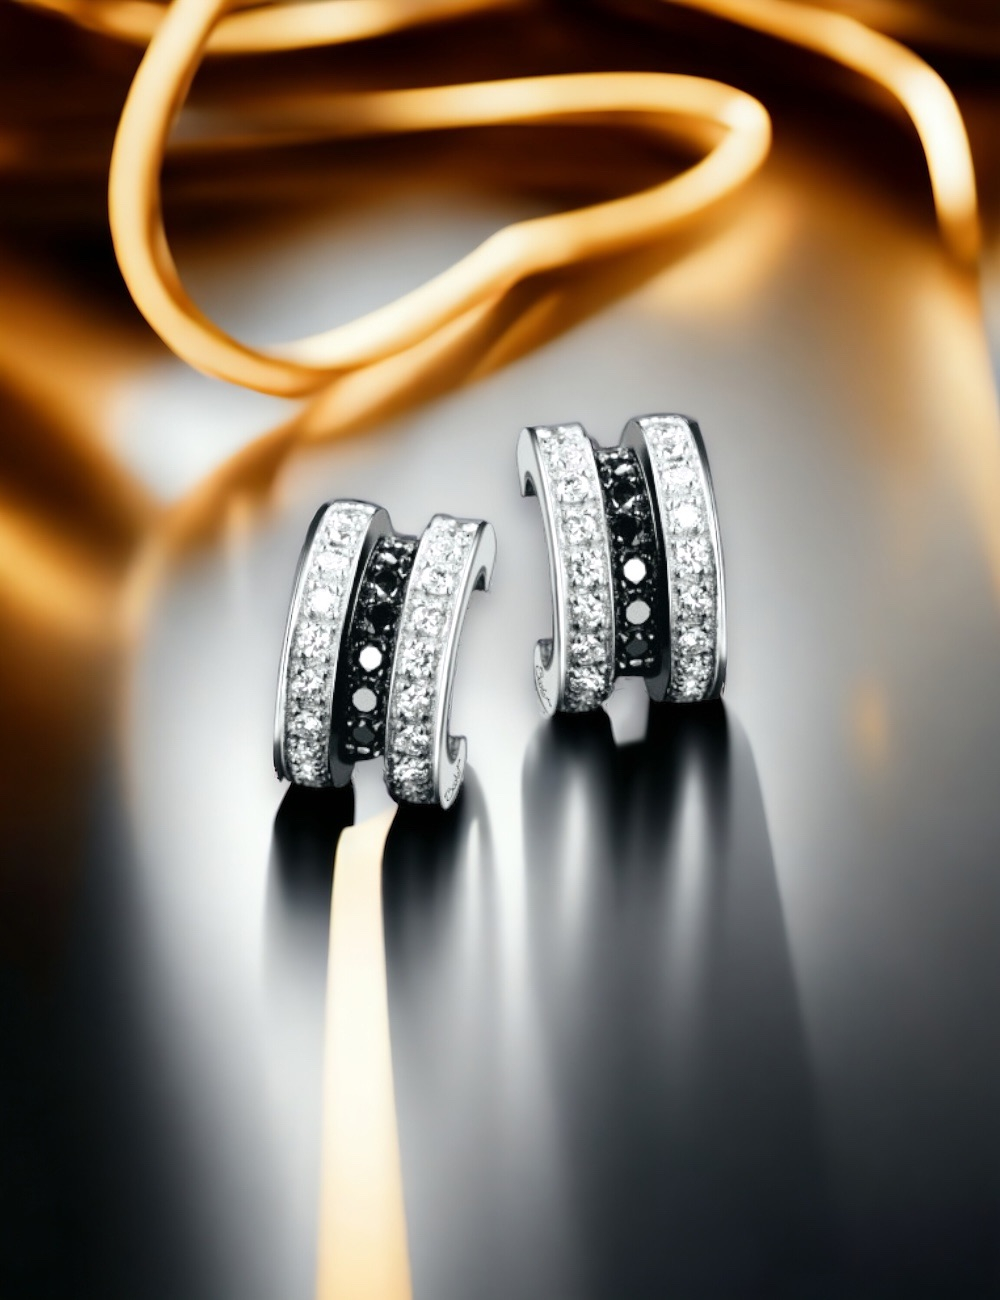 Contrasting elegance: D.Bachet hoops with black and white diamonds in white gold.